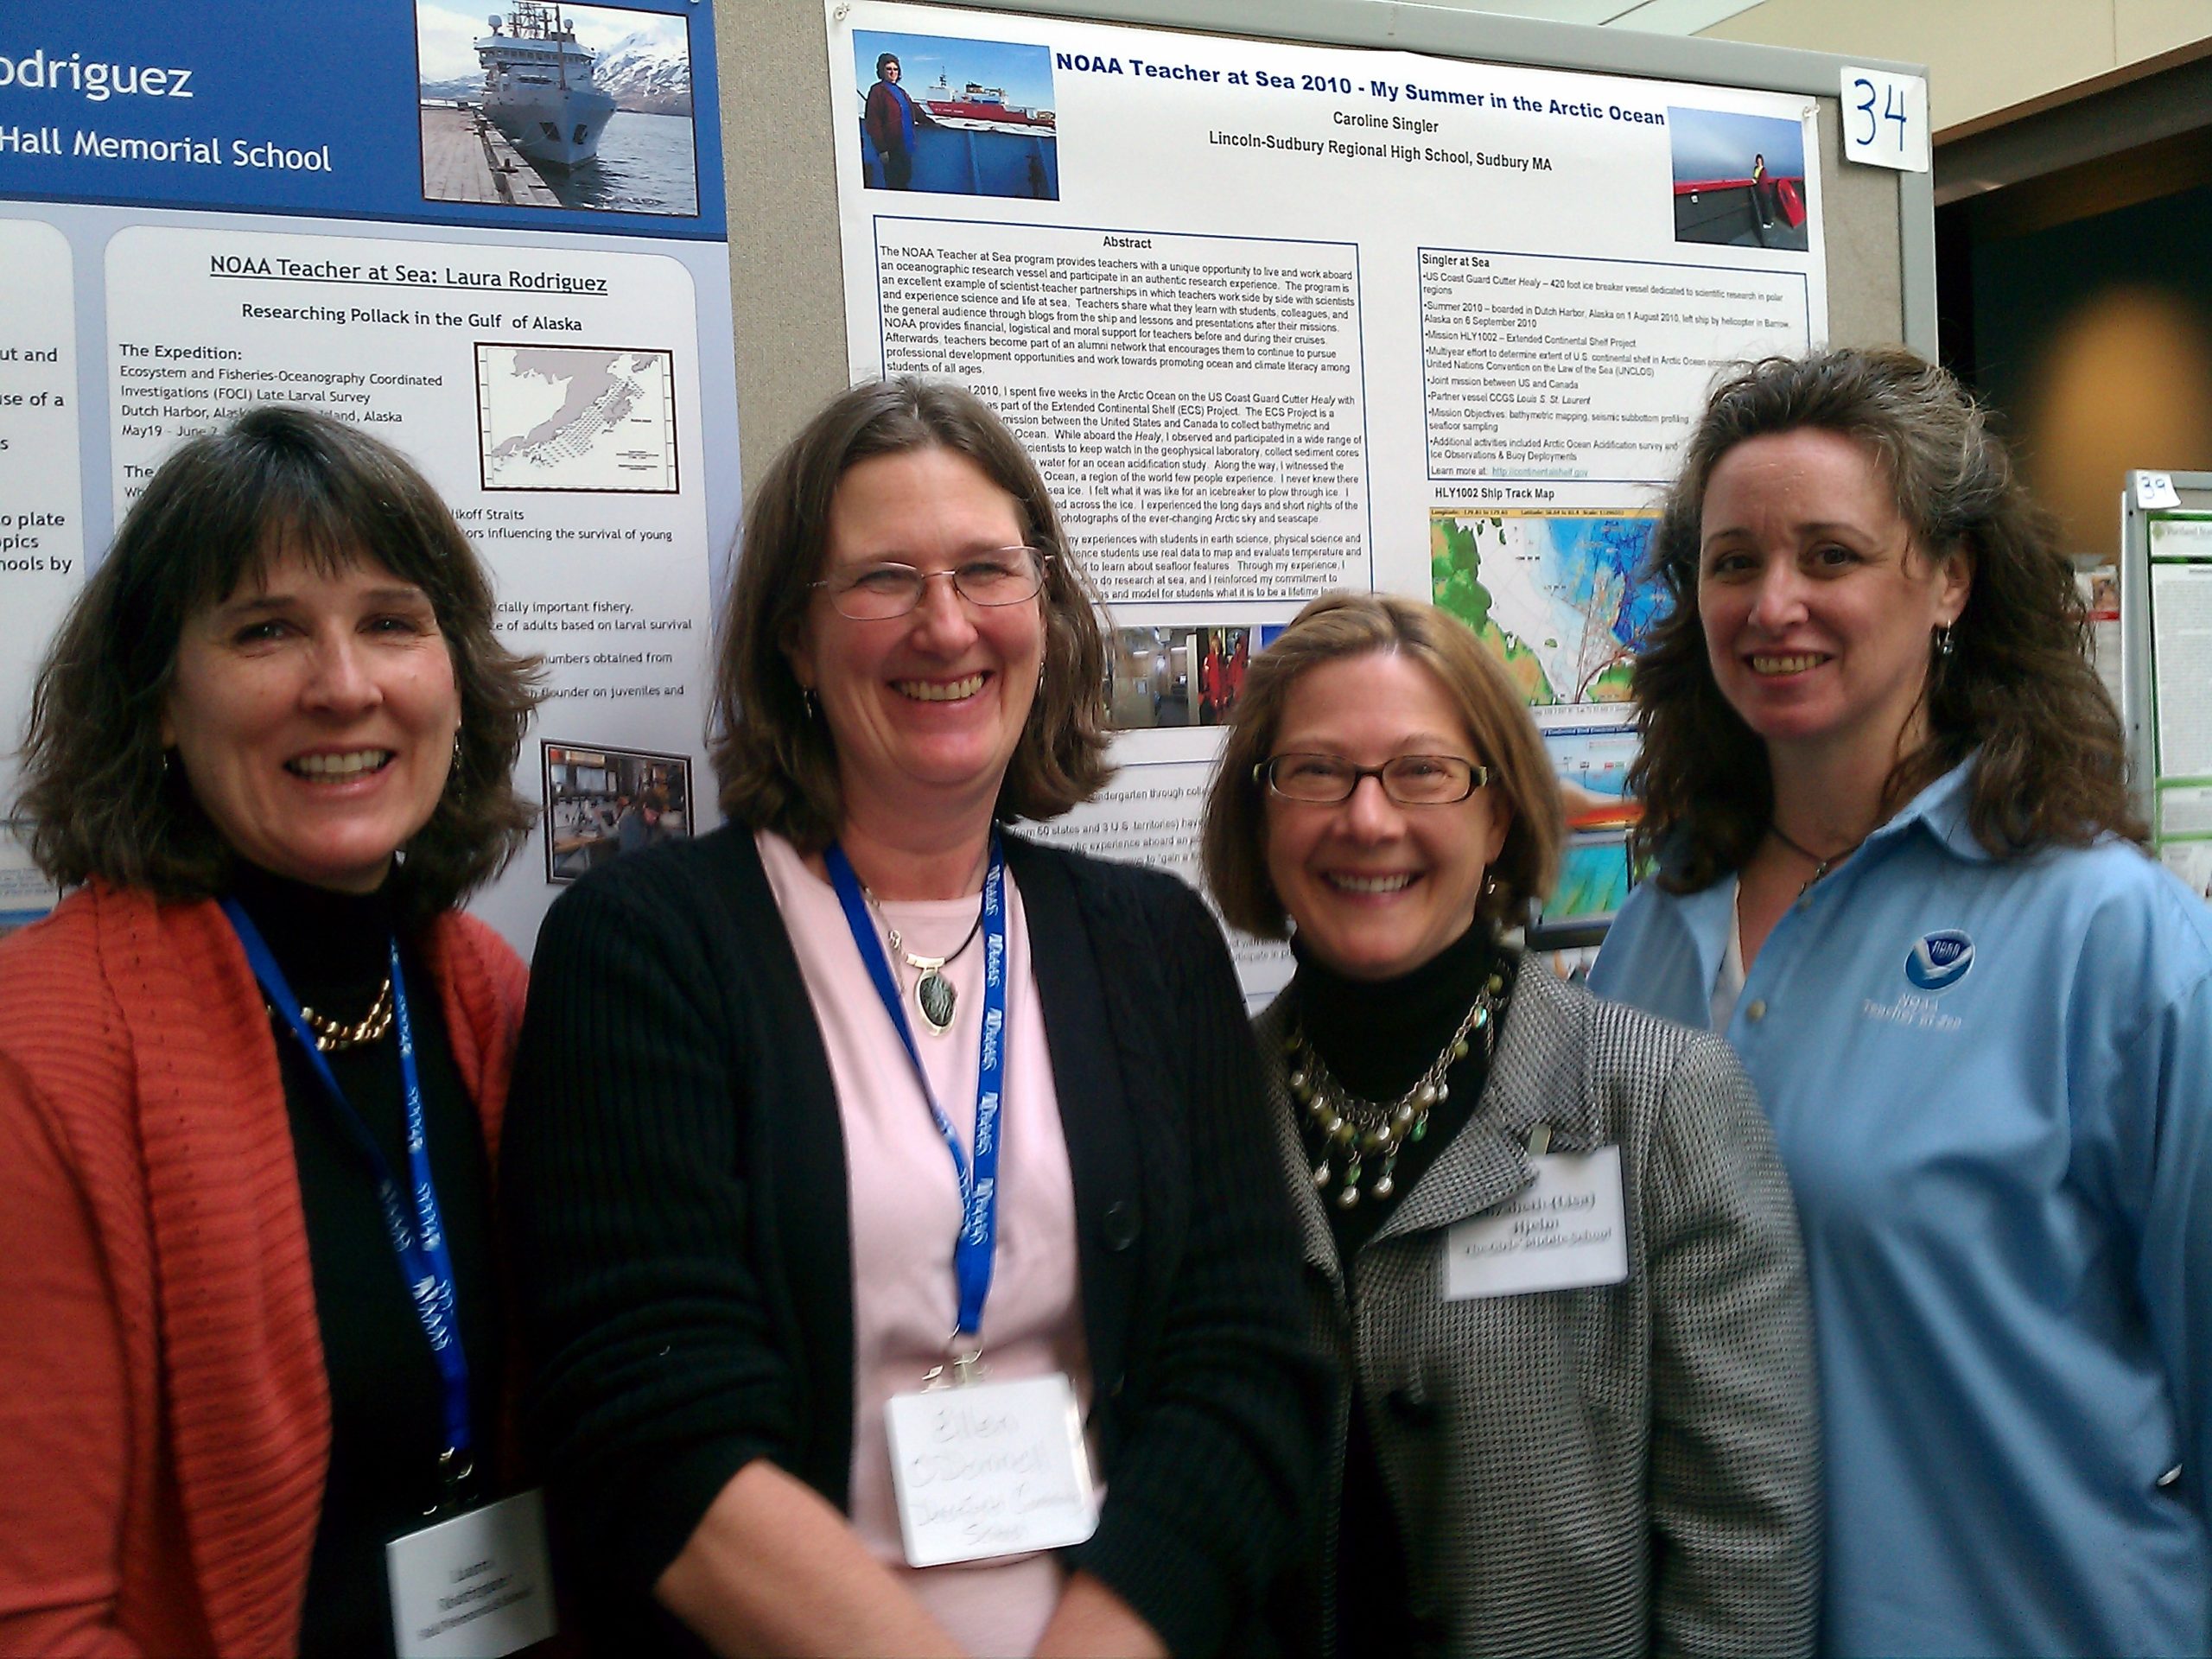 Four women stand in front of a NOAA Teacher at Sea sign.